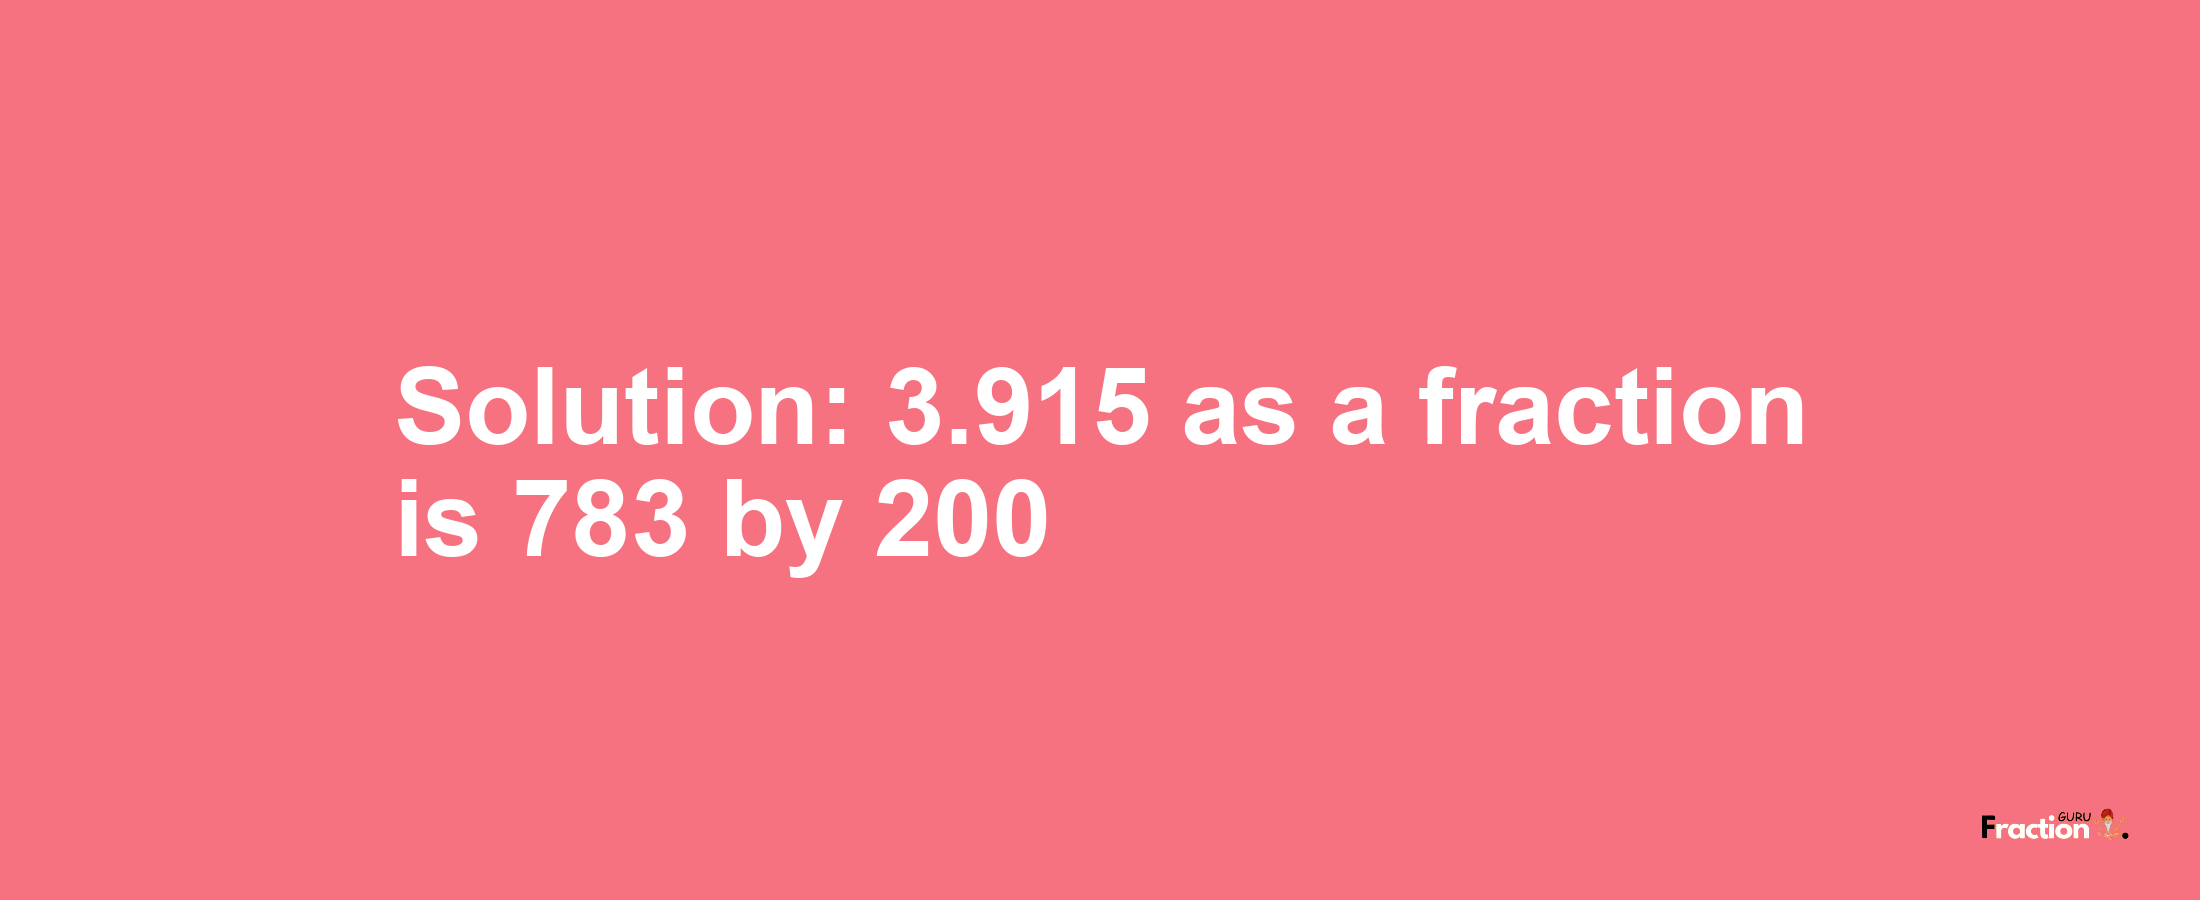 Solution:3.915 as a fraction is 783/200